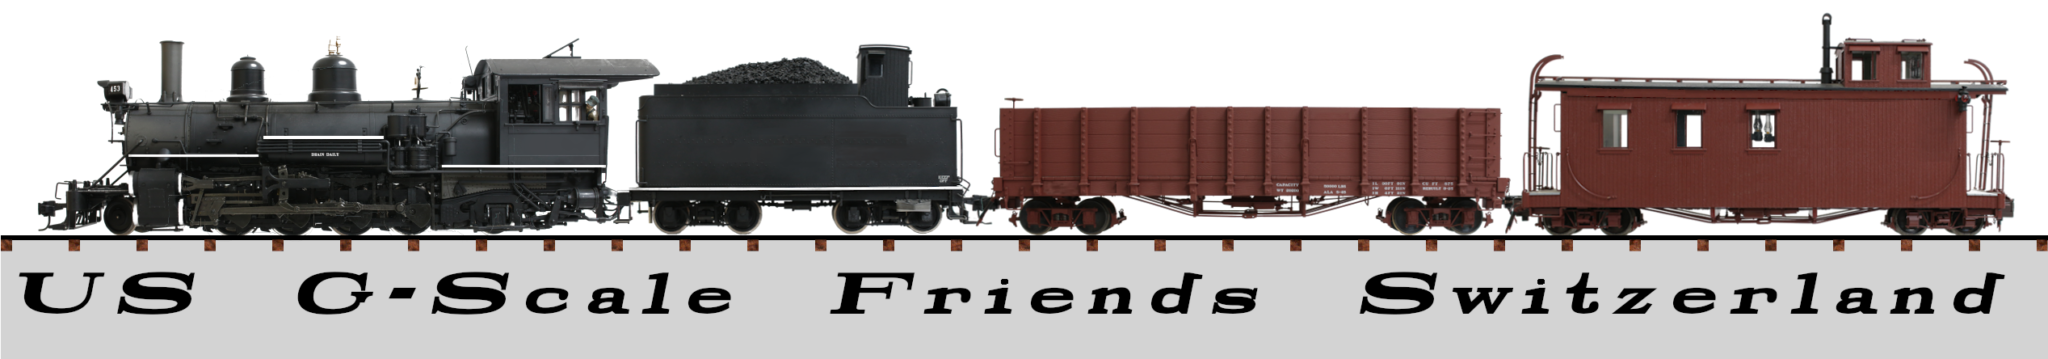 US G-Scale Friends